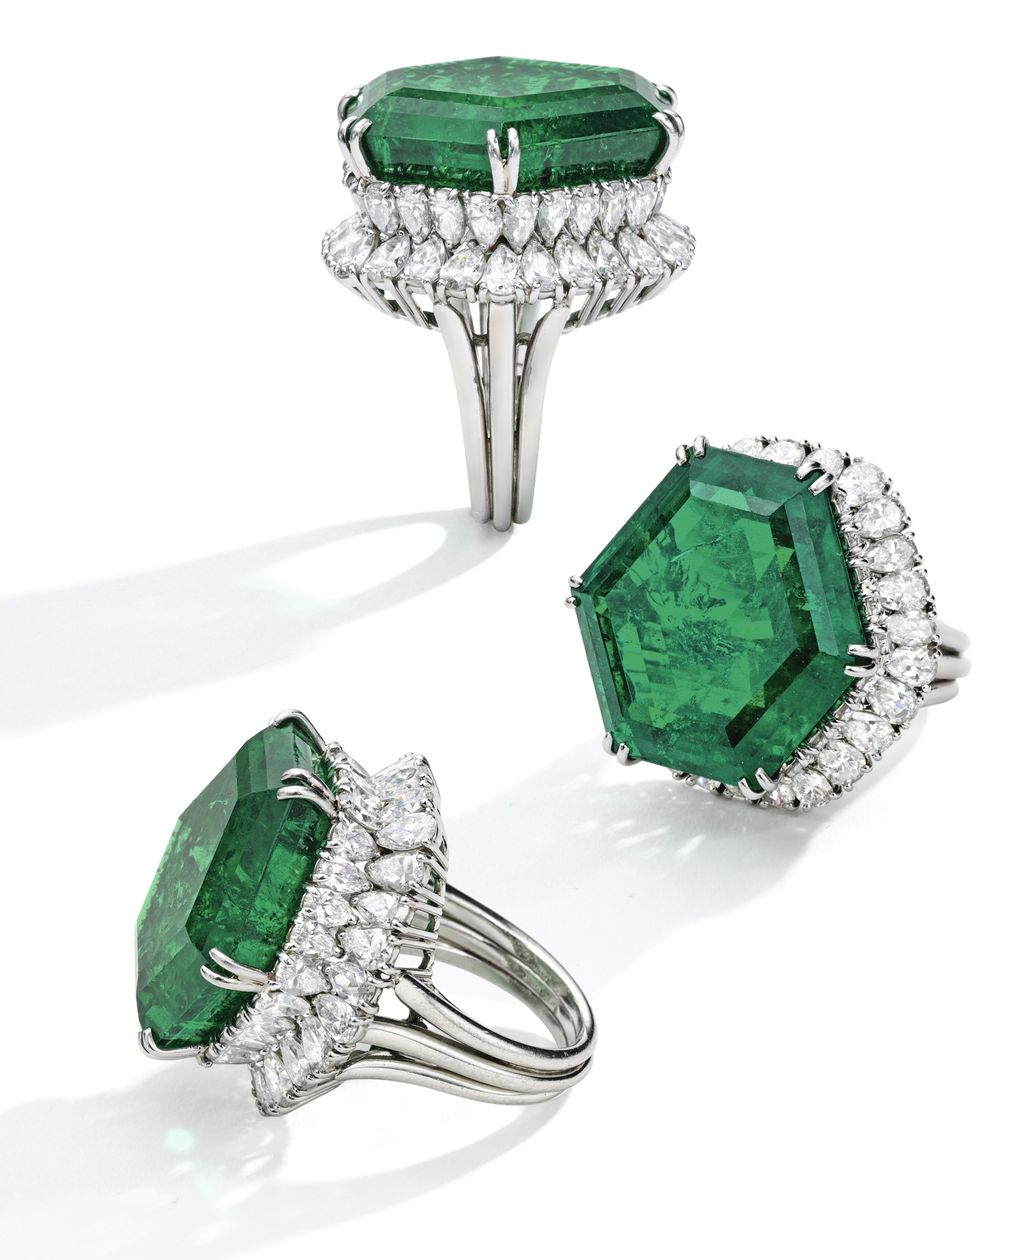 Lot 108 - Different views of the Stotesbury Emerald Ring by Harry Winston